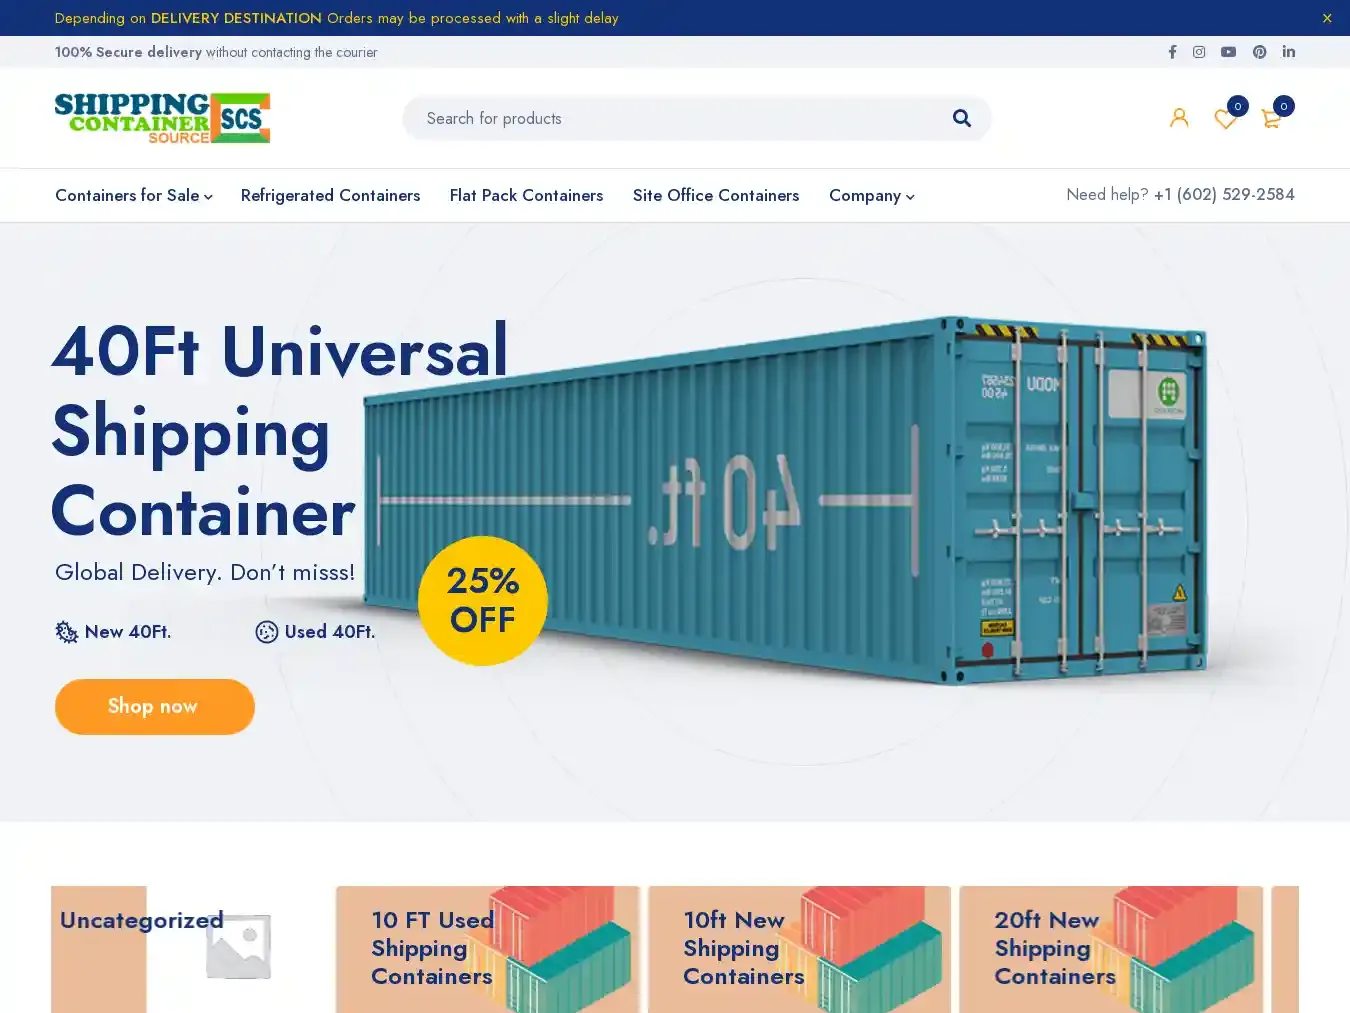 Shippingcontainersource.com Fraudulent Container website.